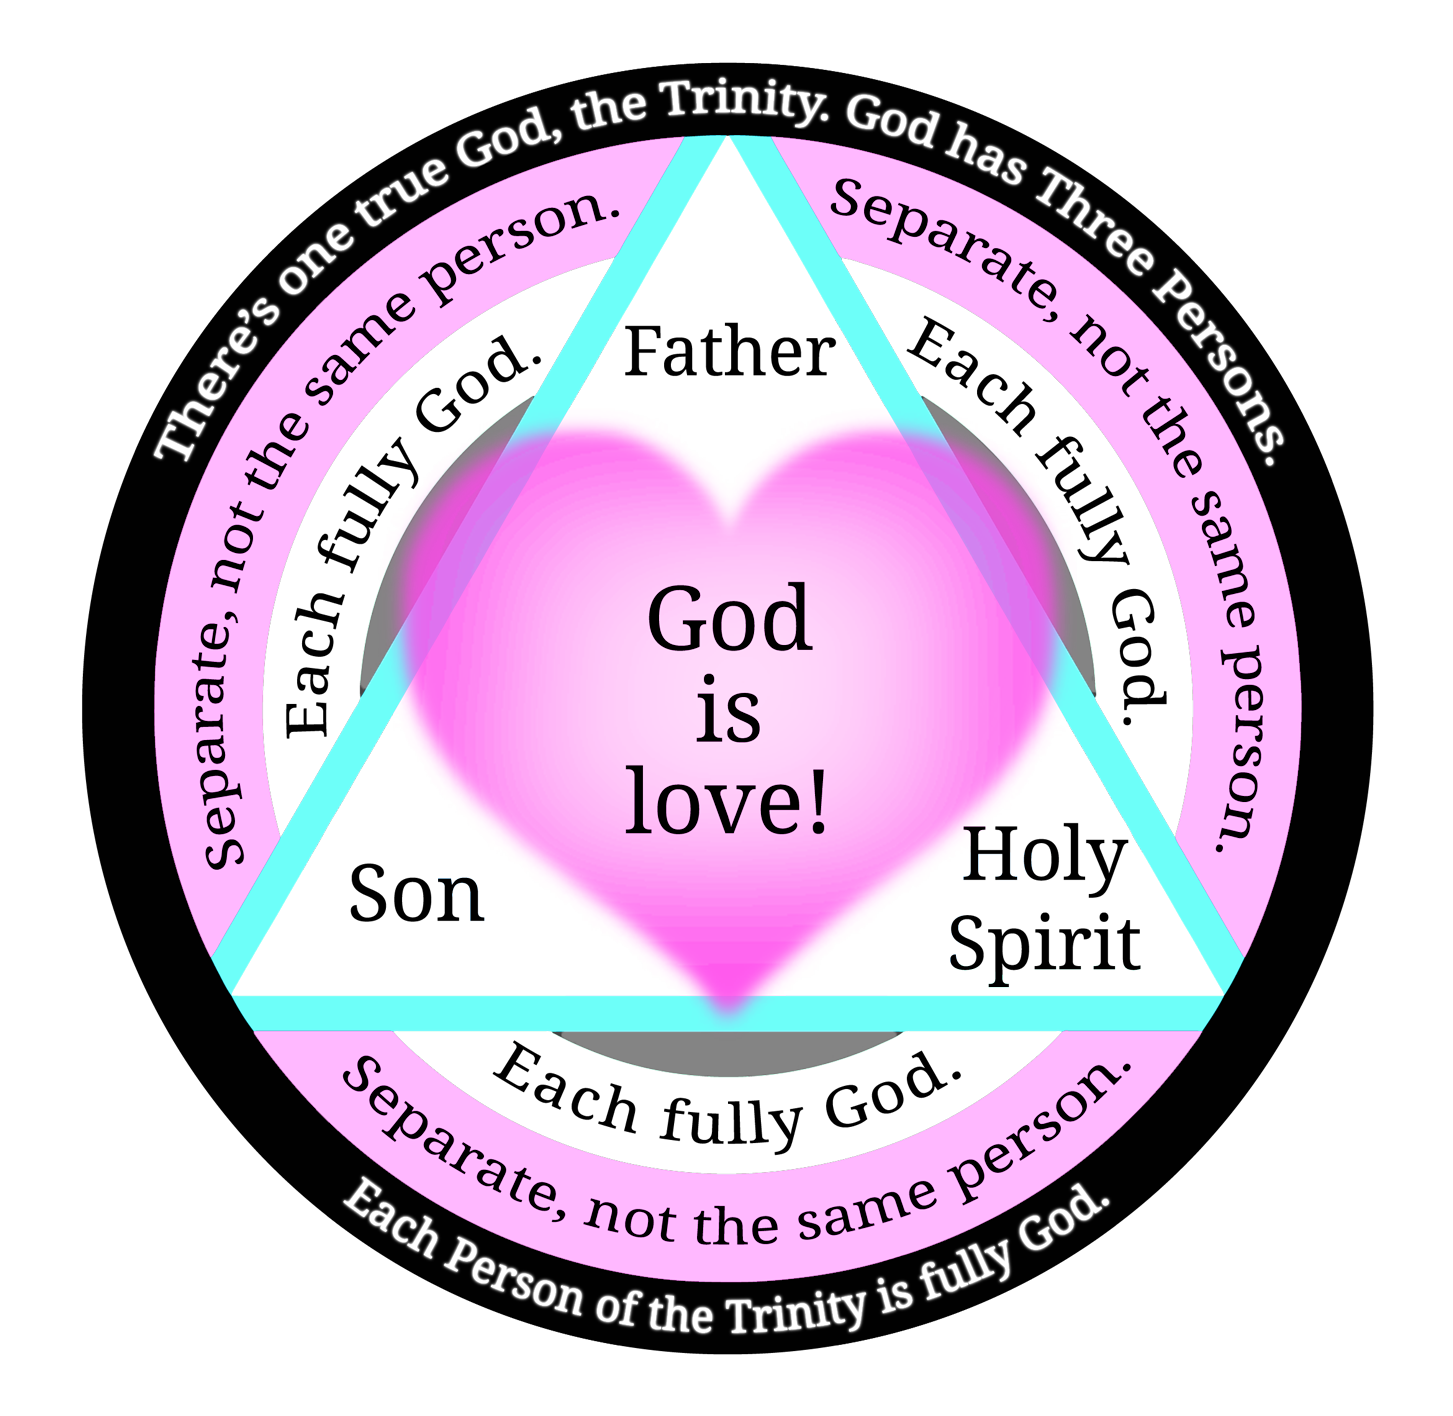 Symbolism of God (the Trinity) with text explaining the Three Persons are separate, revealing their names: God the Father, God the Son, and God the Holy Spirit... each fully God.